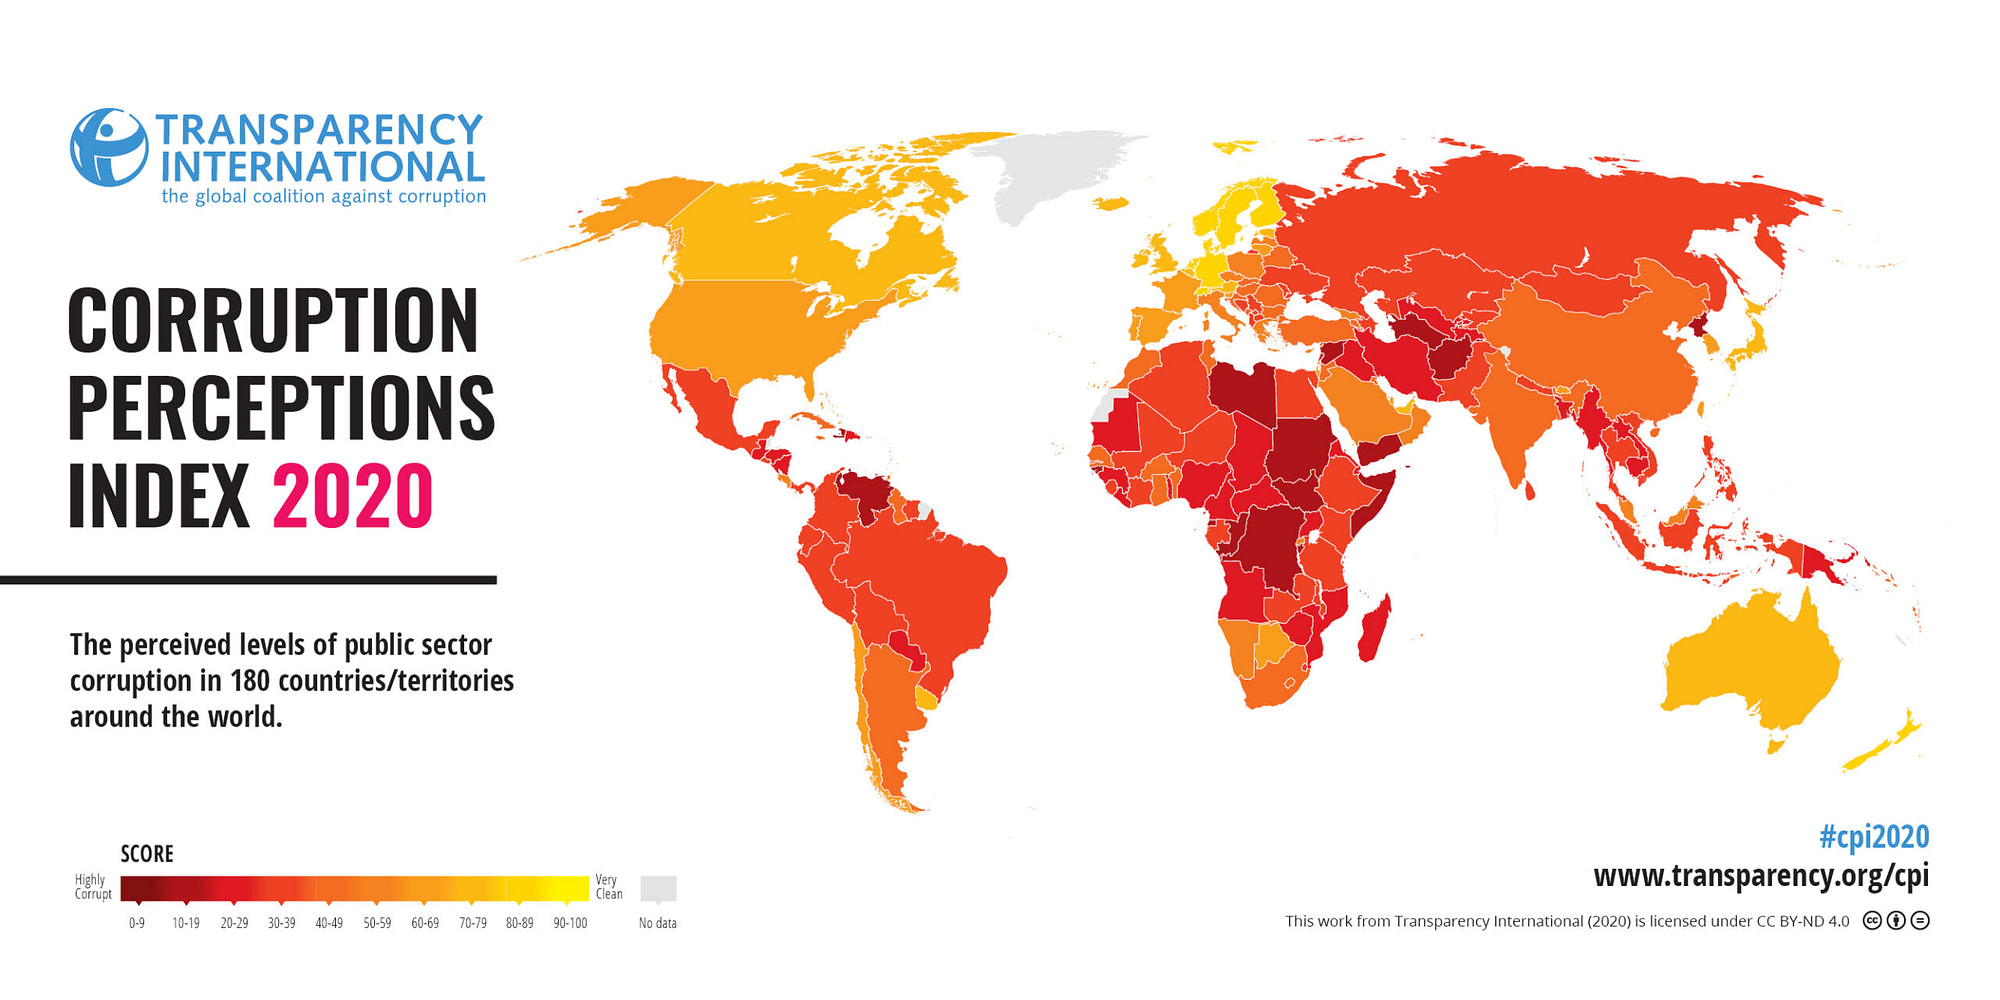 Corruption index by country globally